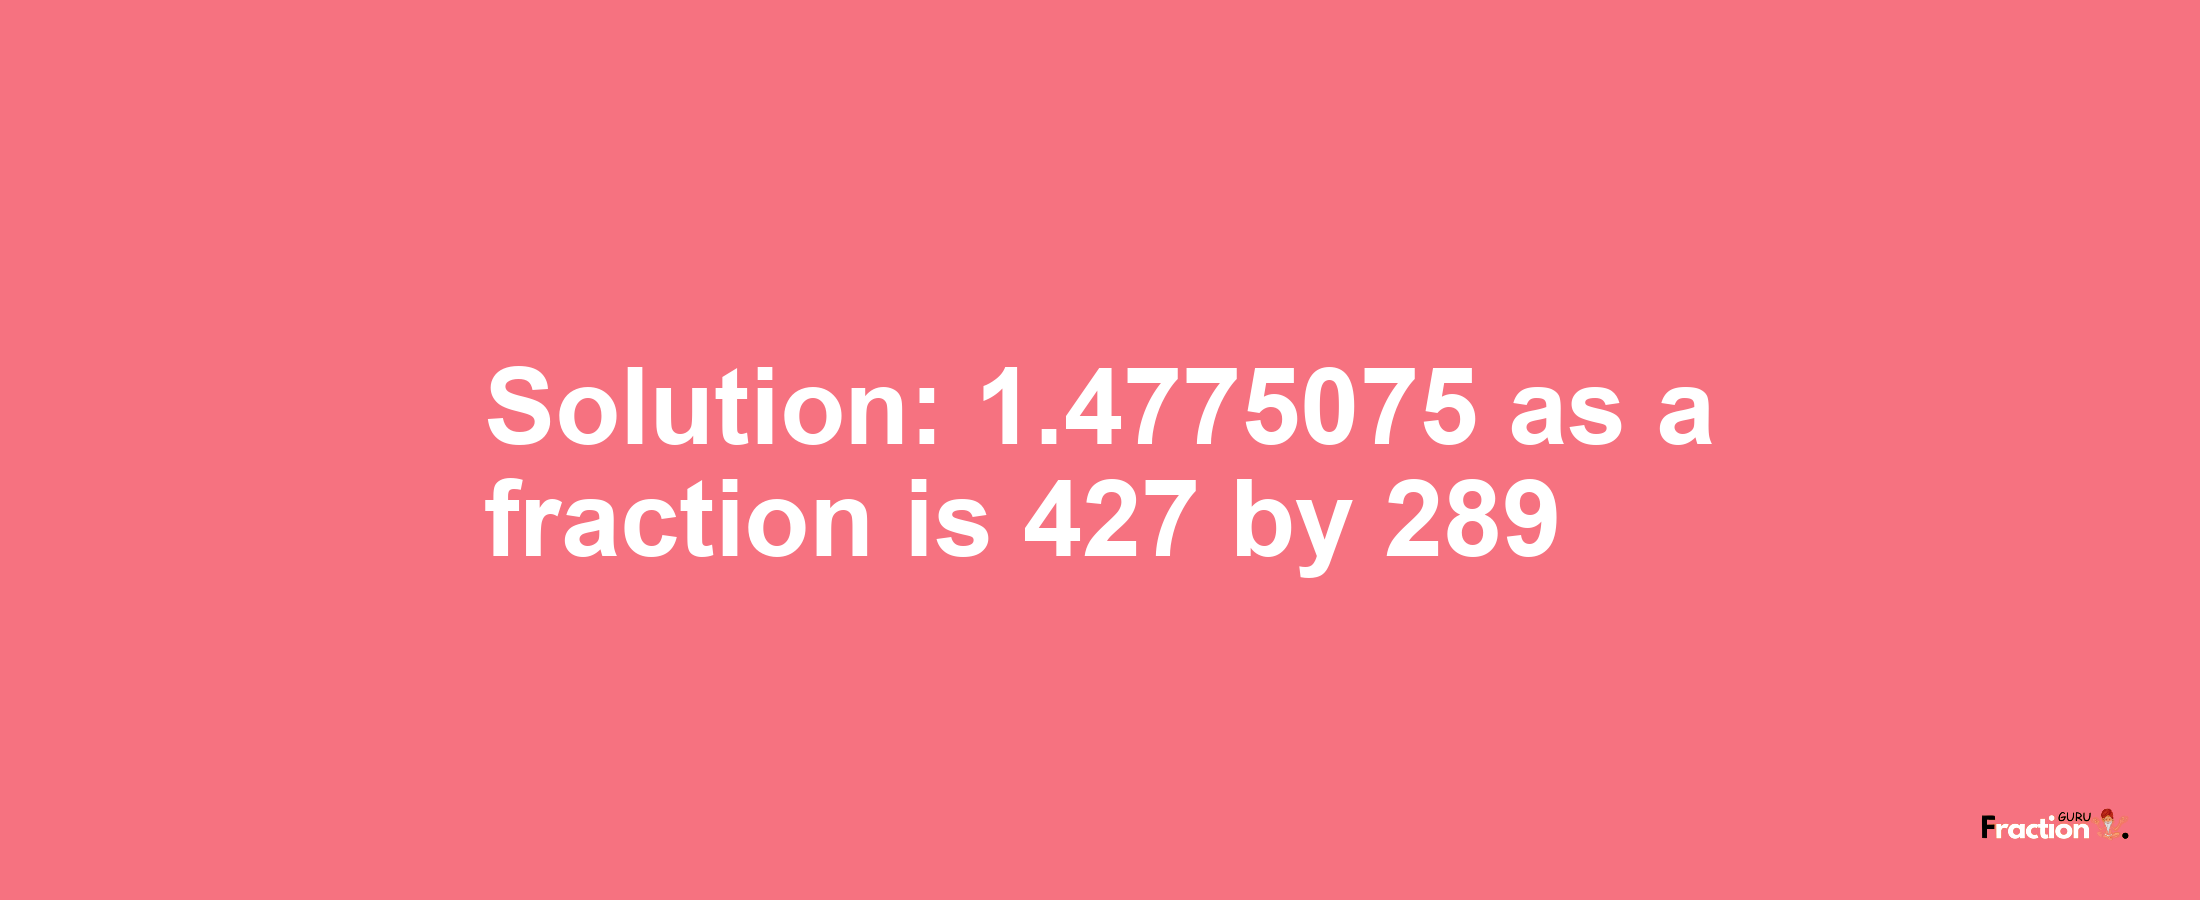 Solution:1.4775075 as a fraction is 427/289